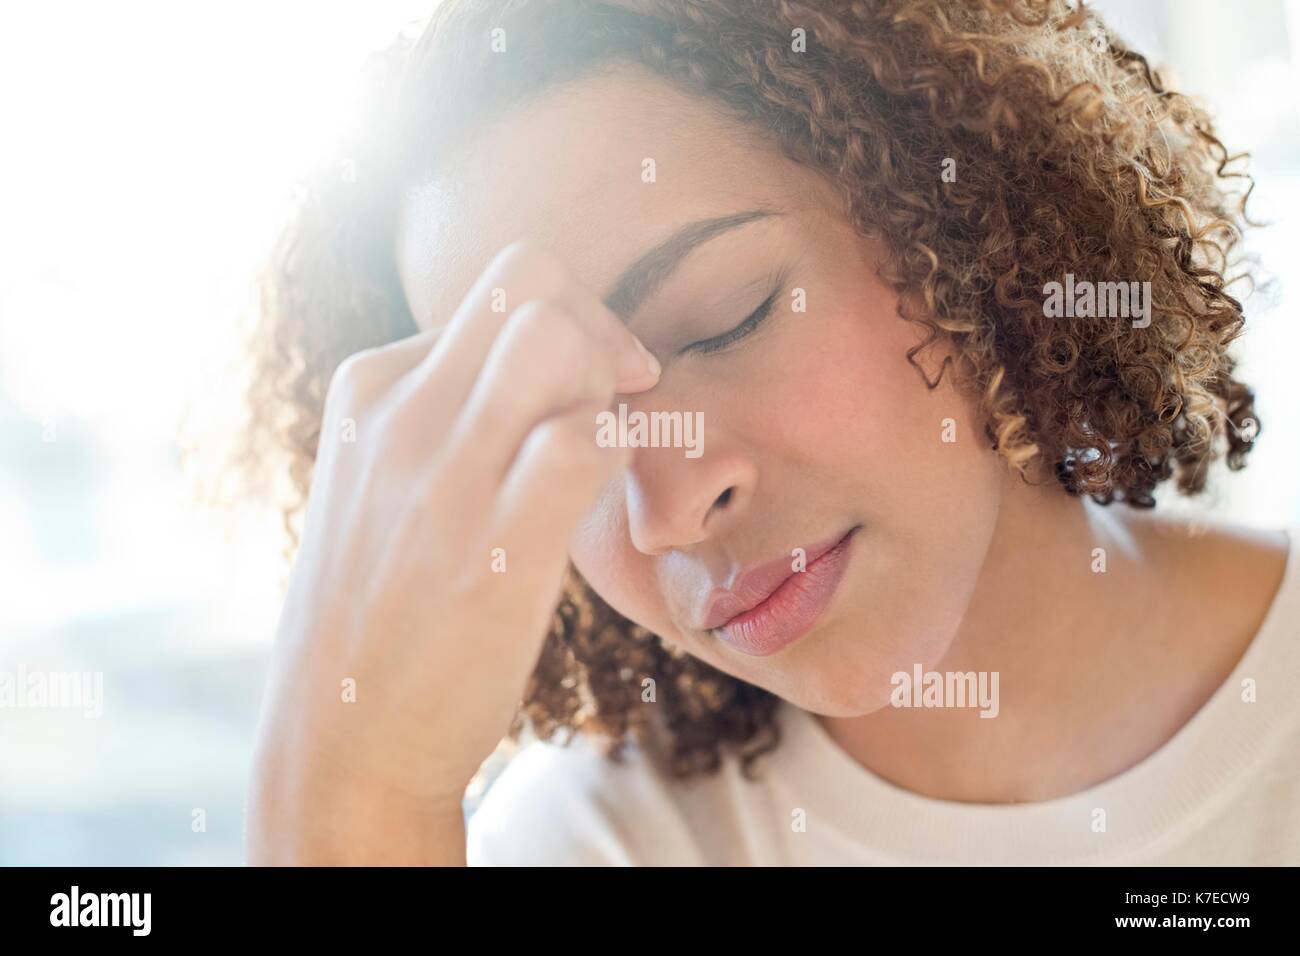 Mid adult woman touching her face. Stock Photo